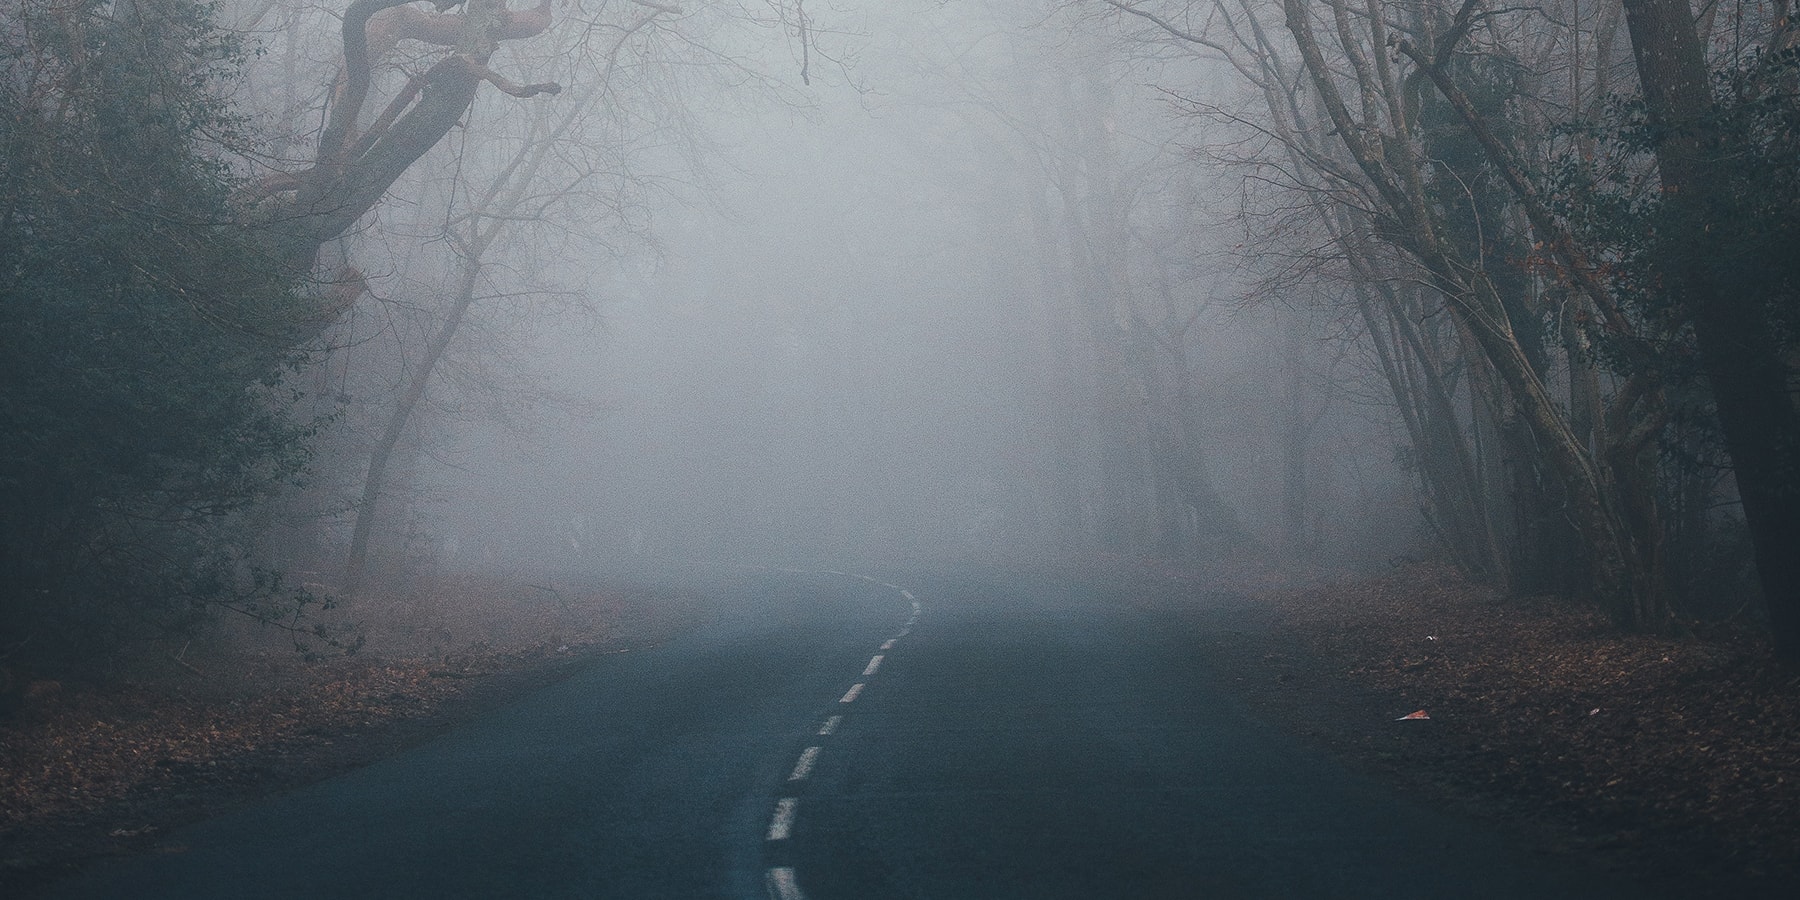 Key safety tips to driving safely in the fog